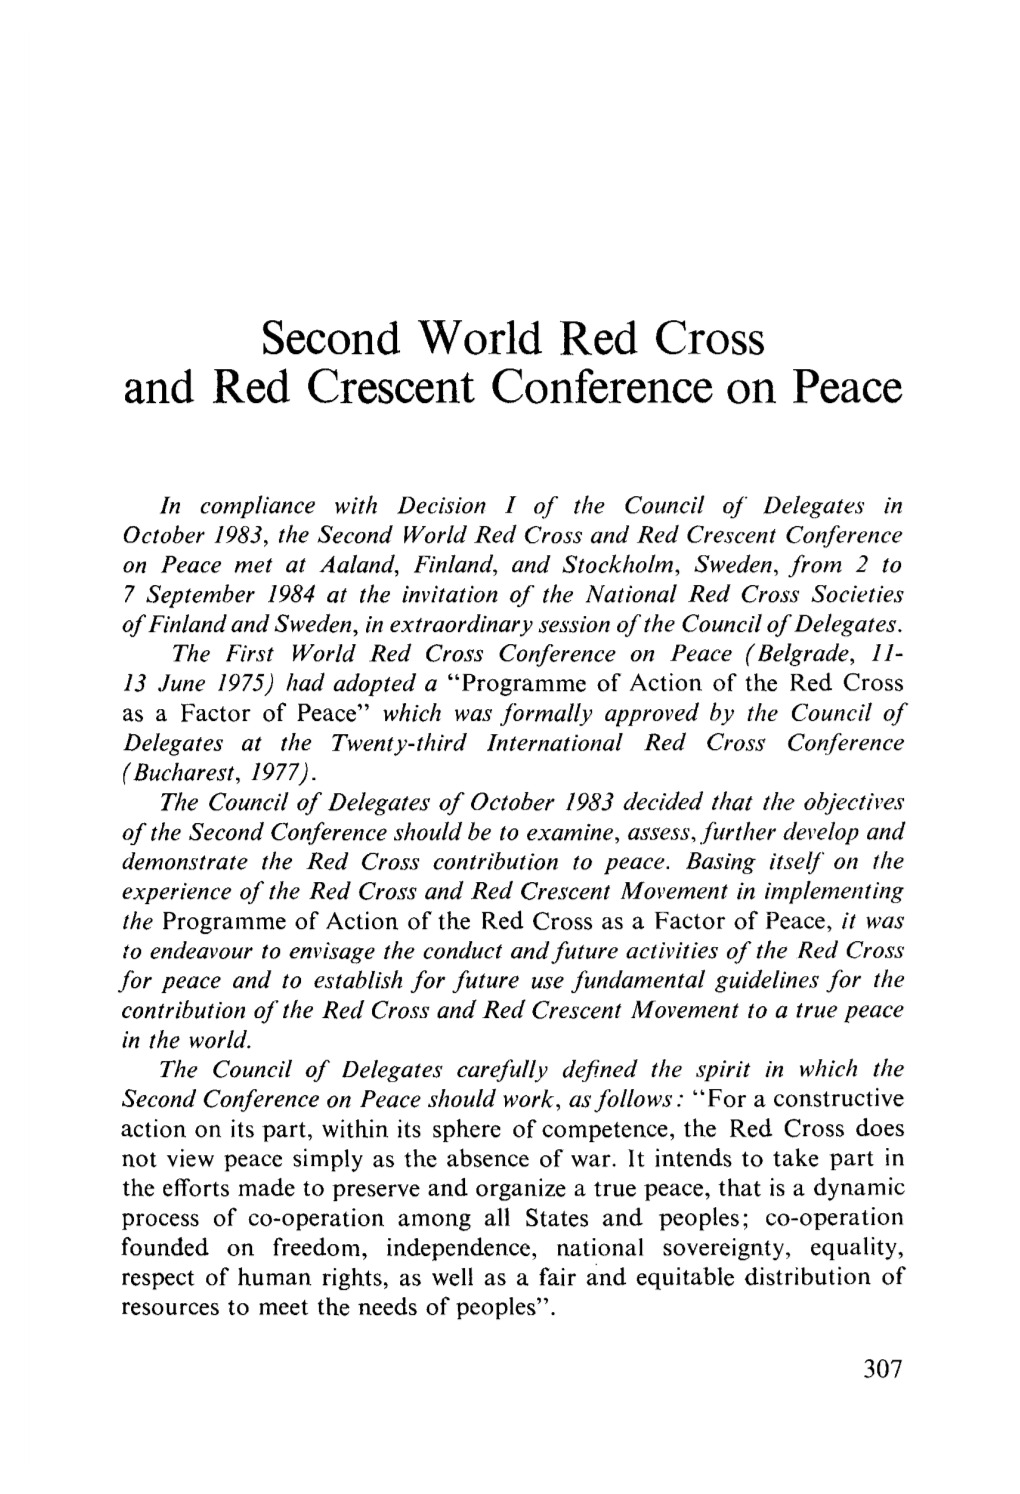 Second World Red Cross and Red Crescent Conference on Peace